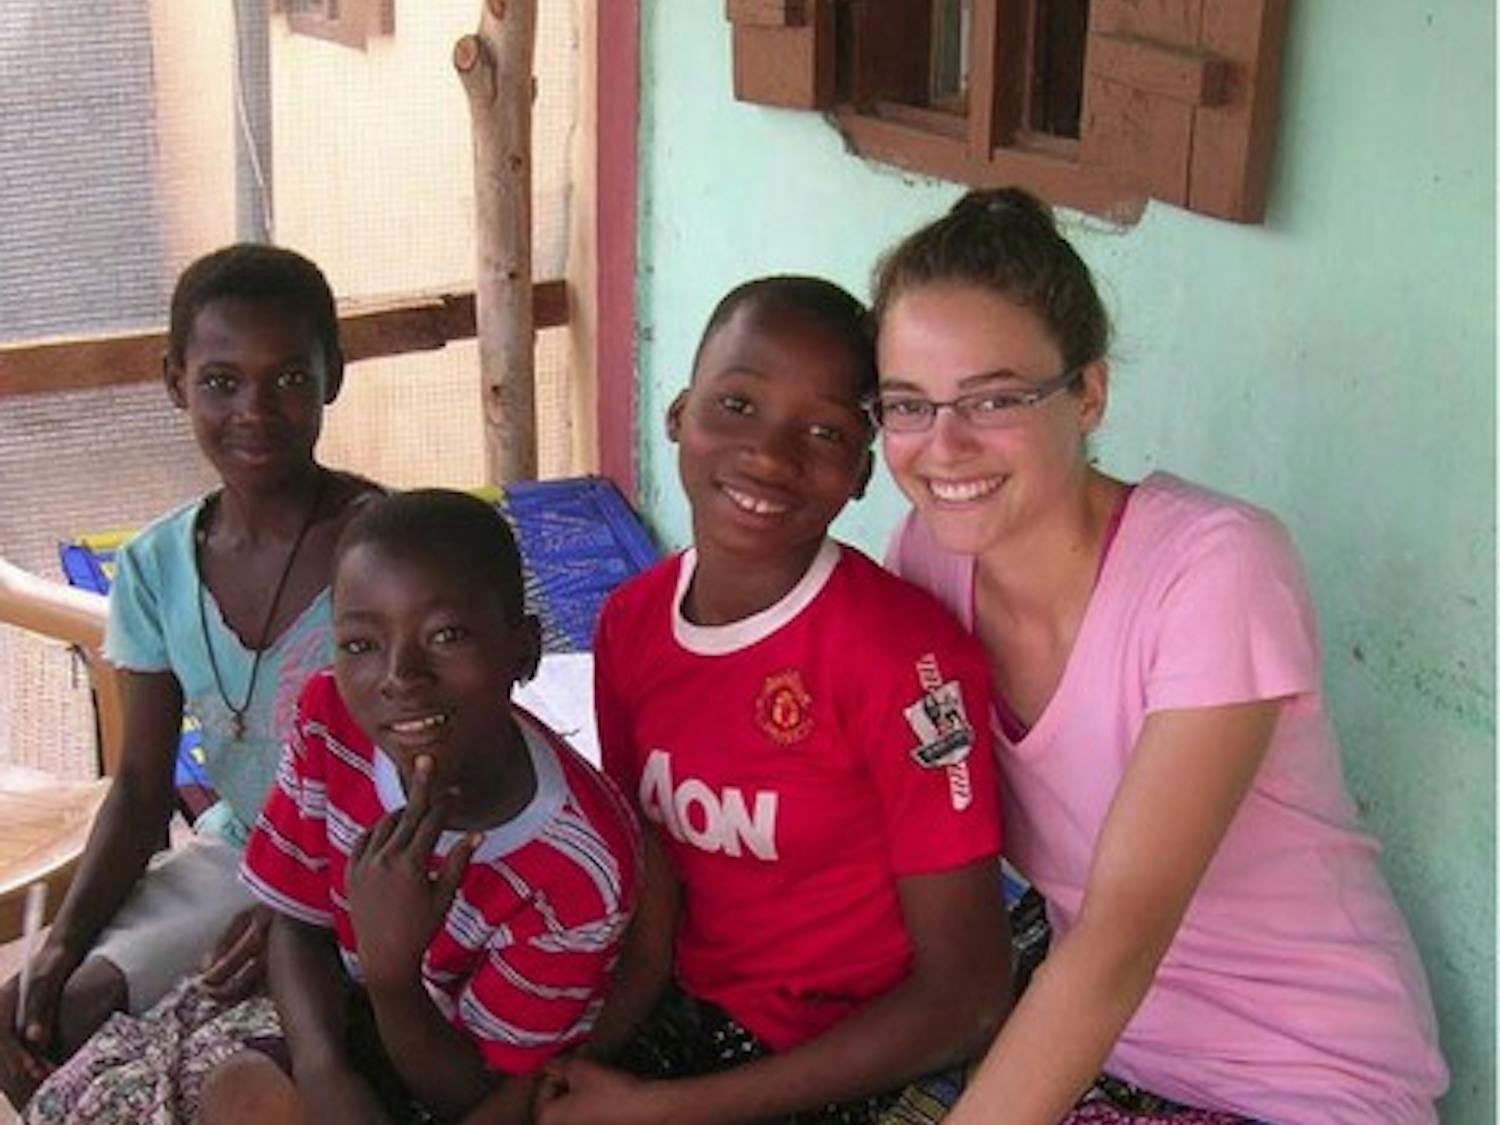 Emily Jones '08, whose two-year Peace Corps assignment in Togo ends in November 2012, has worked to improve the local education system.